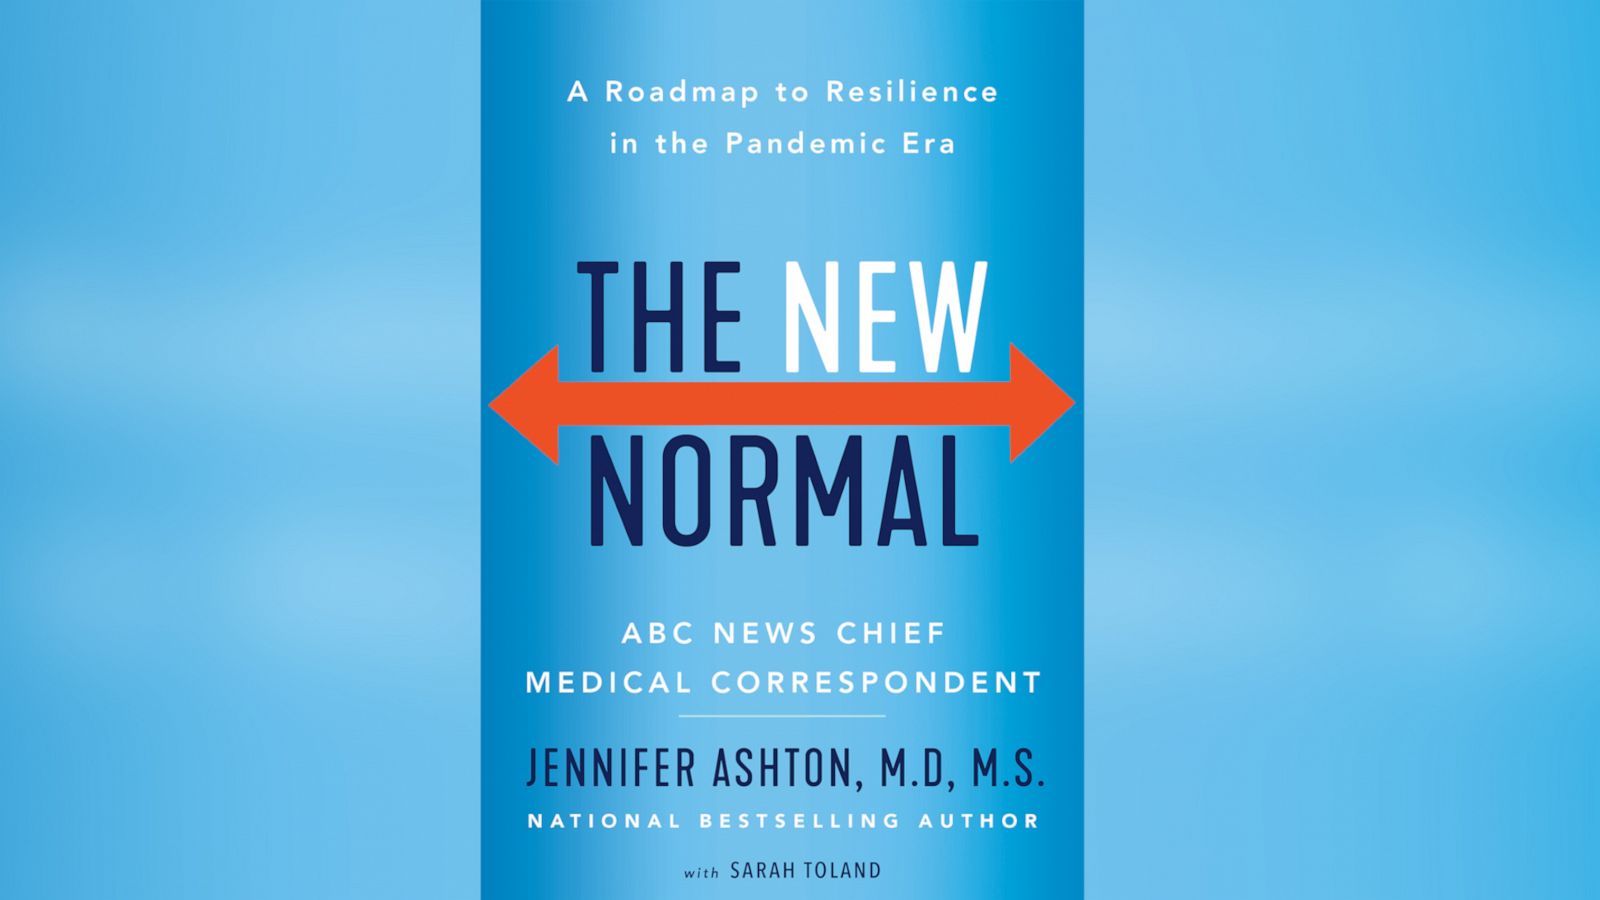 Read an excerpt of Dr. Jennifer Ashton's new book, 'The New Normal: A  Roadmap to Resilience in the Pandemic Era' - ABC News